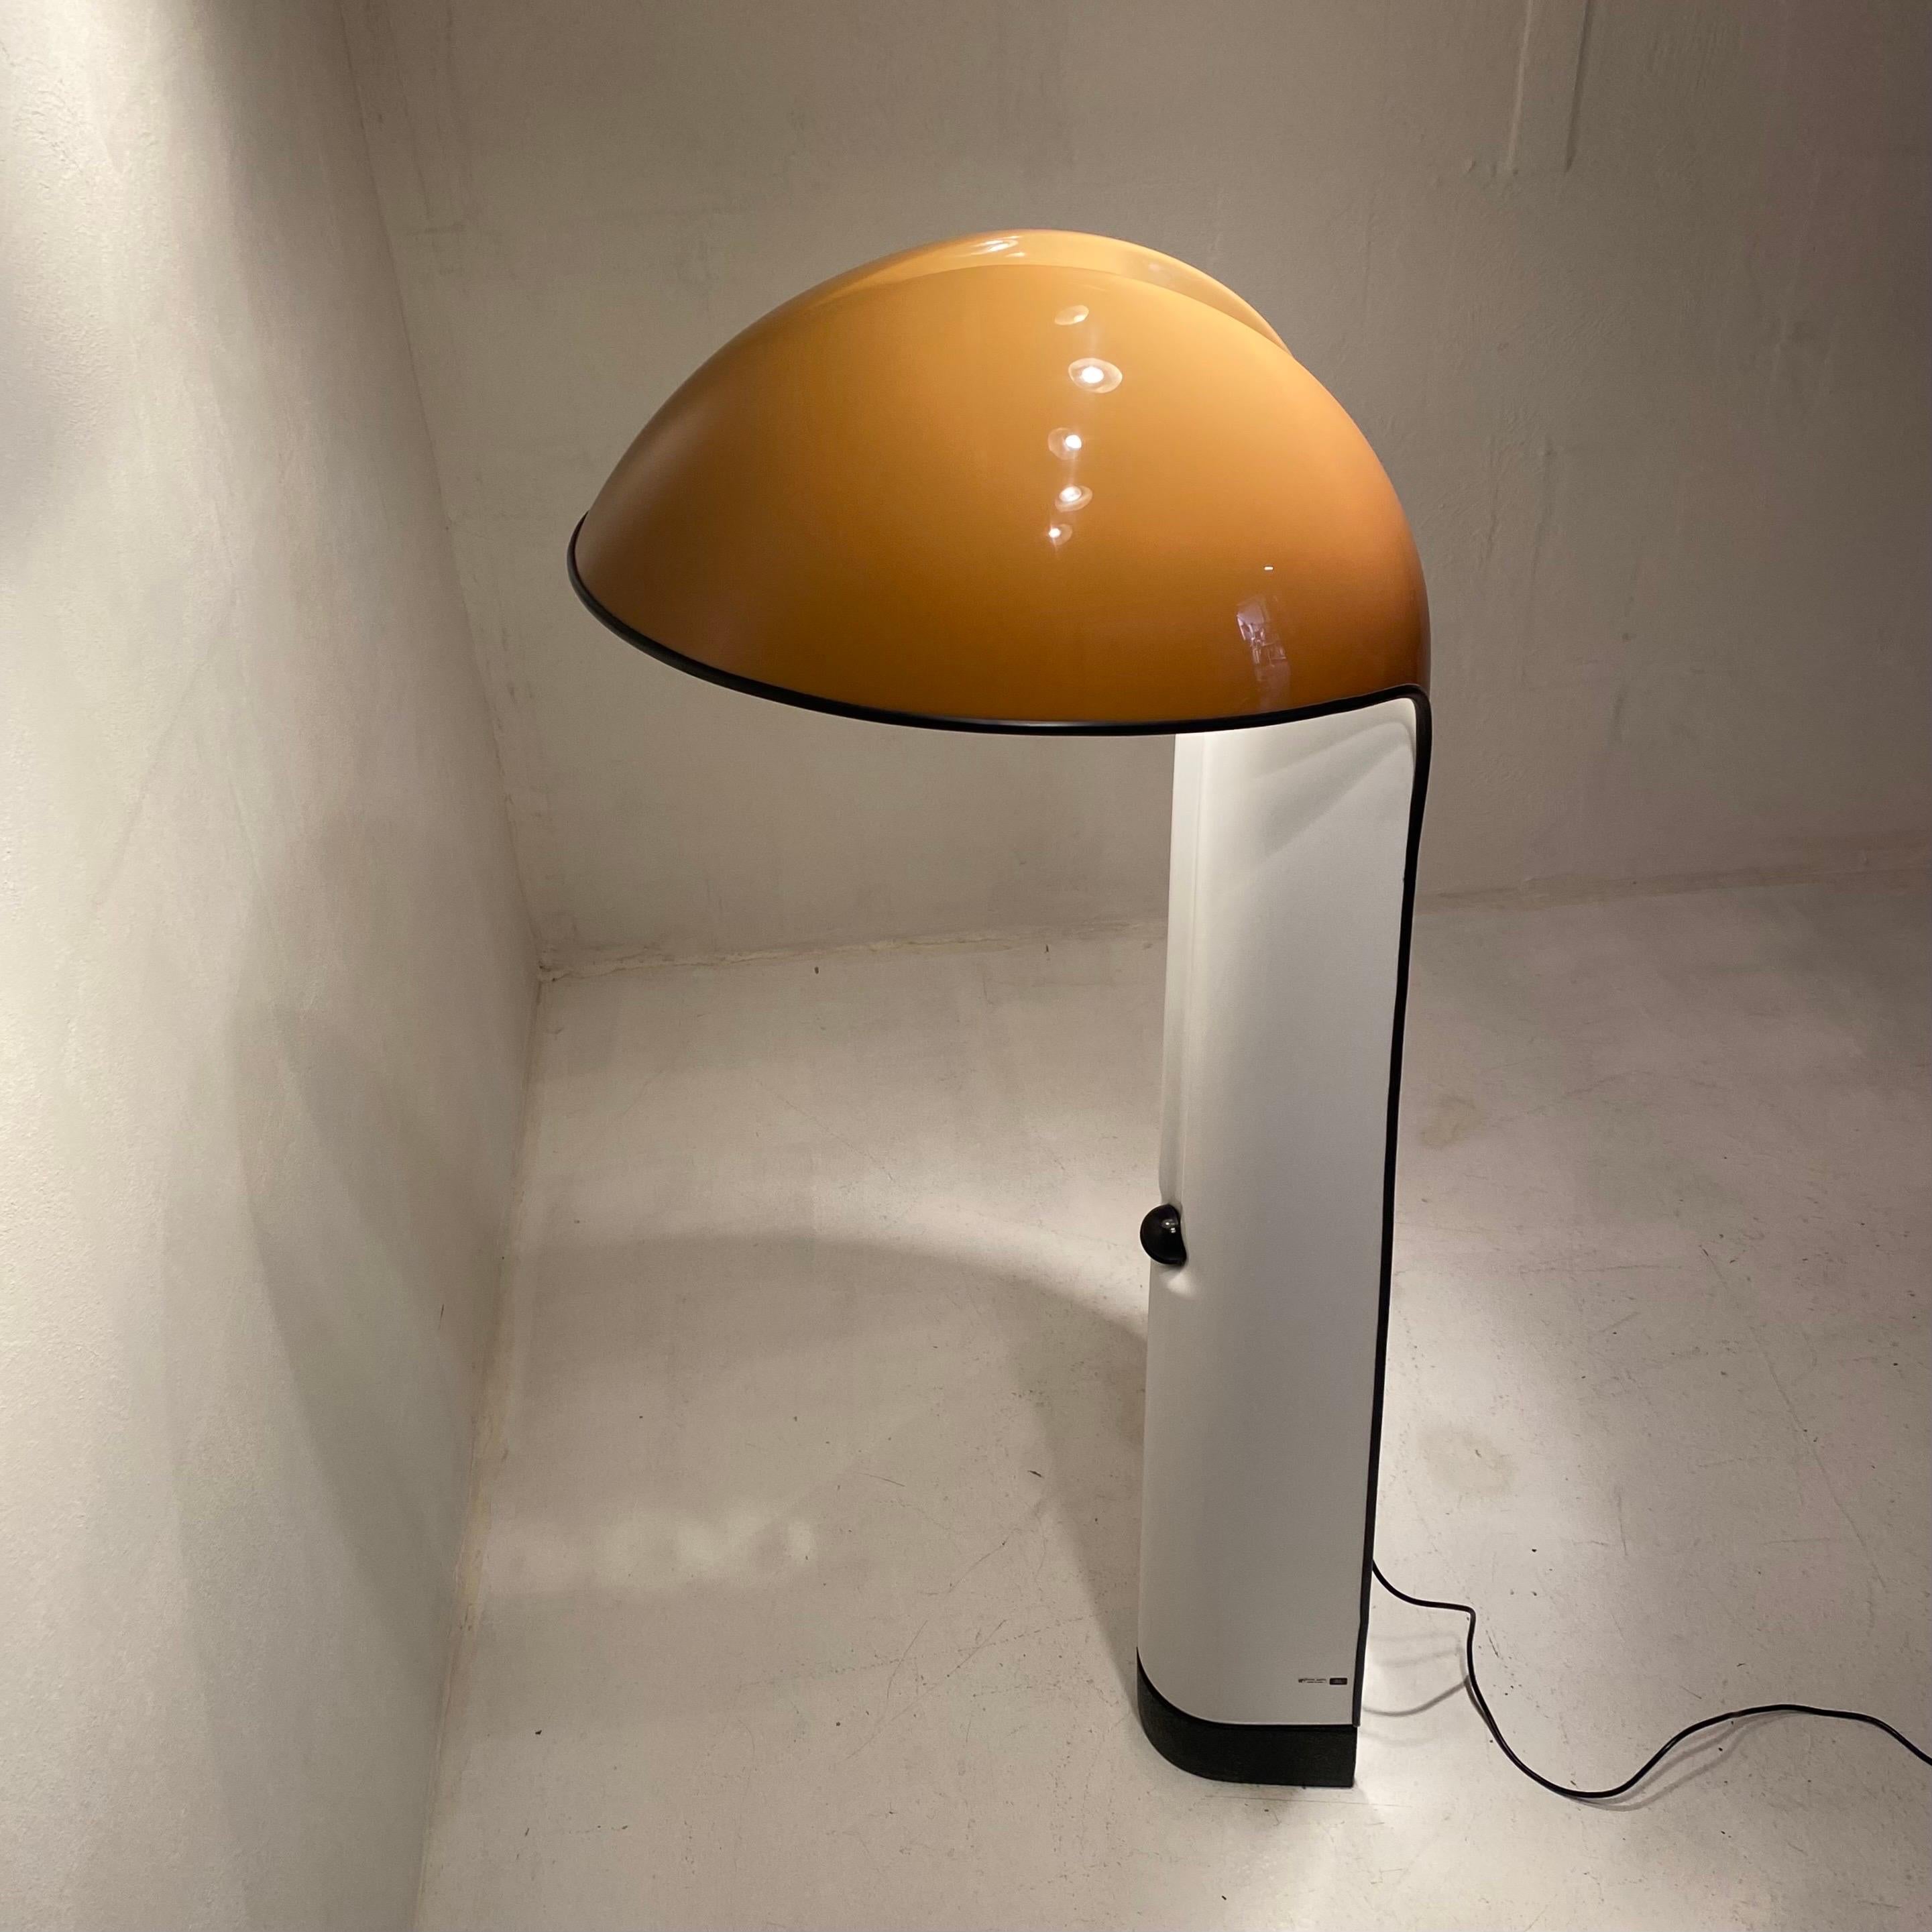 Rare and iconic Italian floor lamp, Alba, meticulously designed by Ermanno Lampa and Sergio Brazzoli for Guzzini in the 1970s. 

Crafted with caramel-colored plastic on the exterior and pristine white on the interior, this original masterpiece